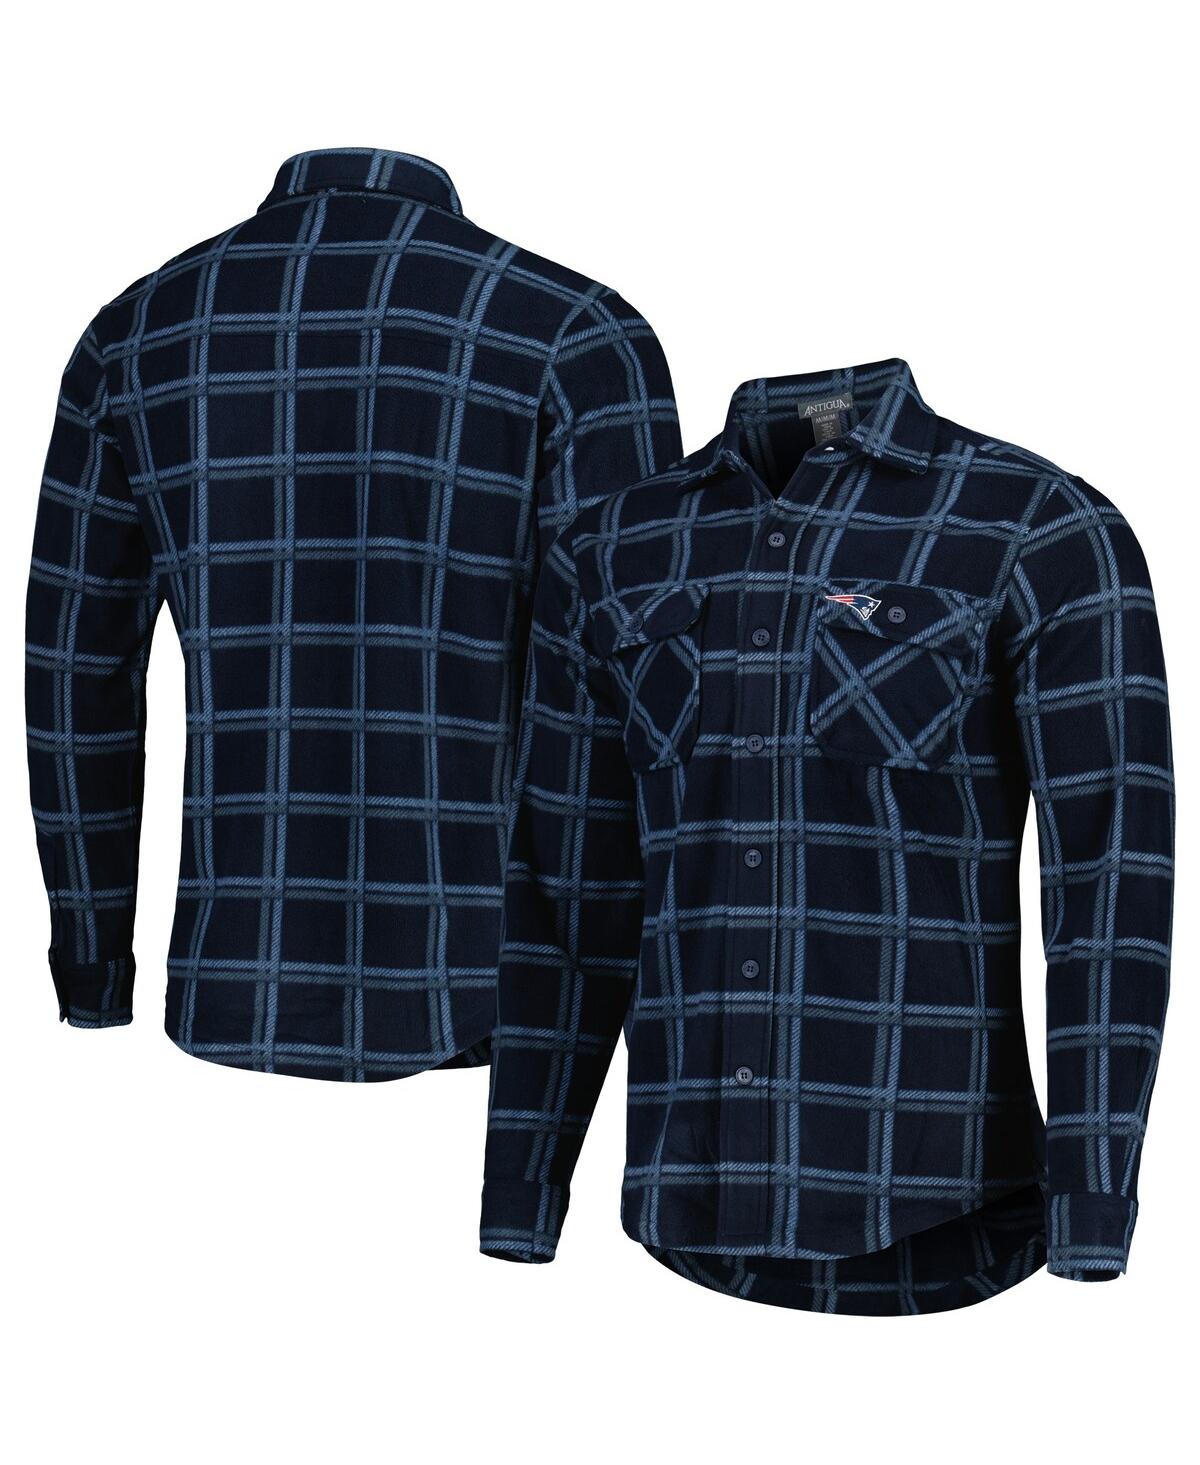 Men's Antigua Navy New England Patriots Industry Flannel Button-Up Shirt Jacket - Navy